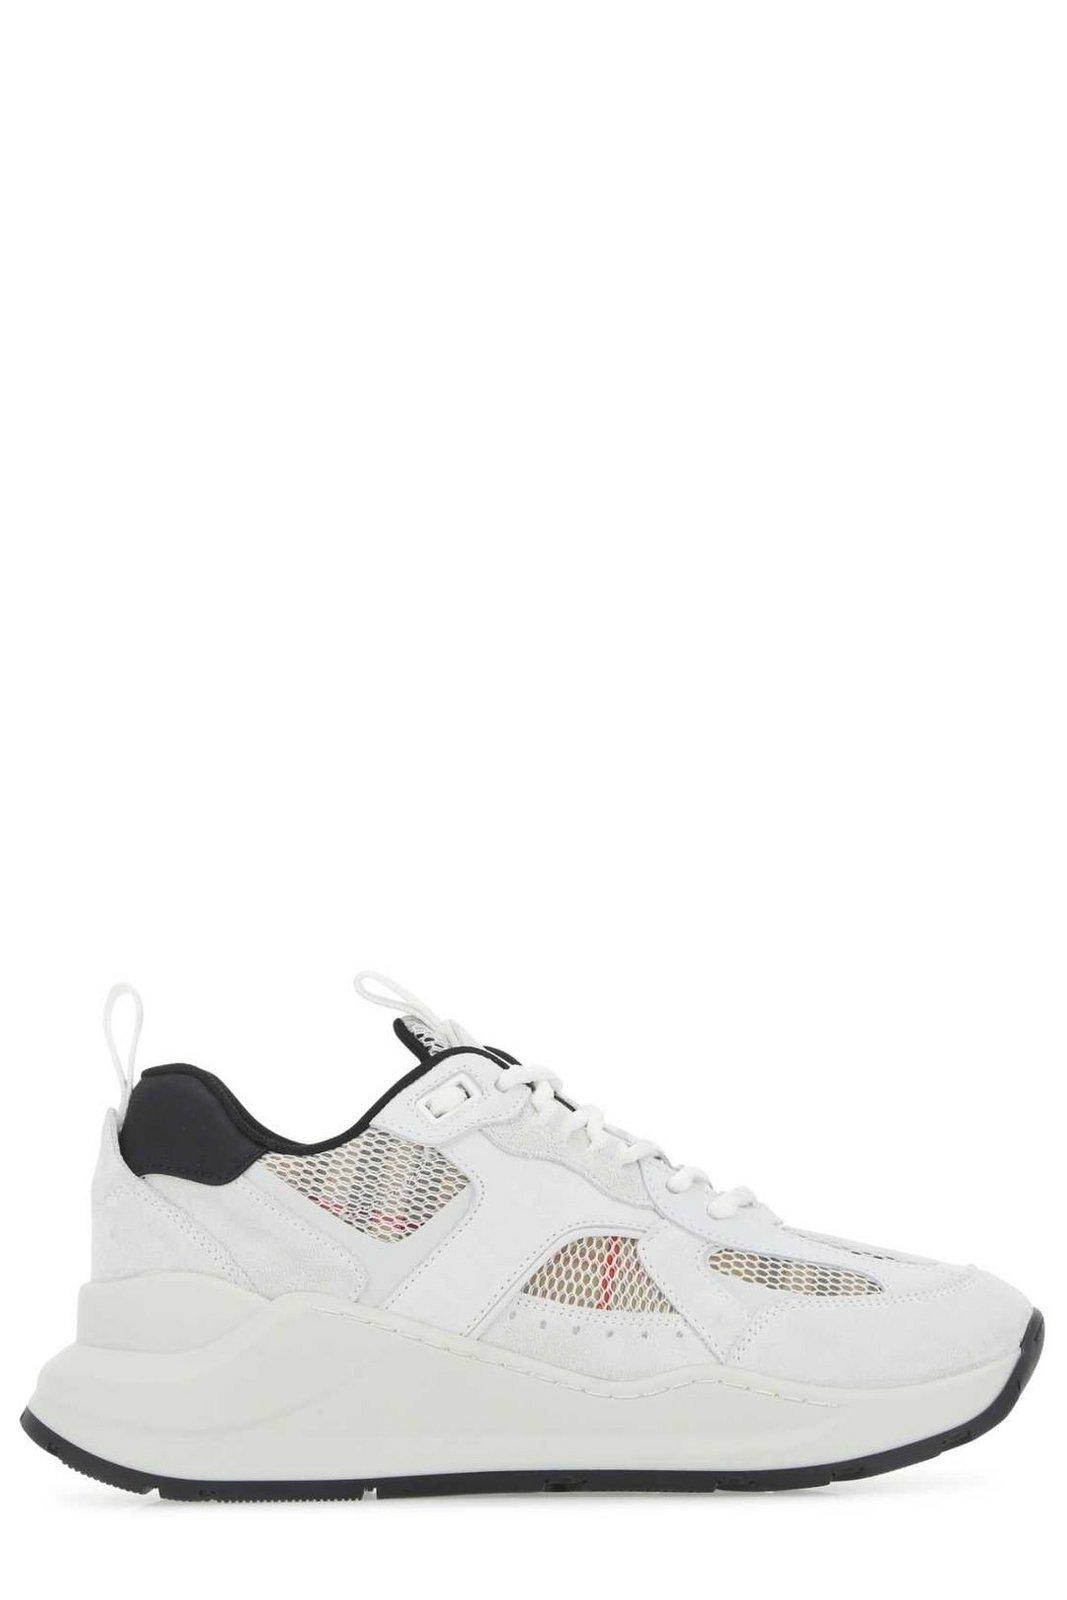 BURBERRY PANELLED LACE-UP SNEAKERS